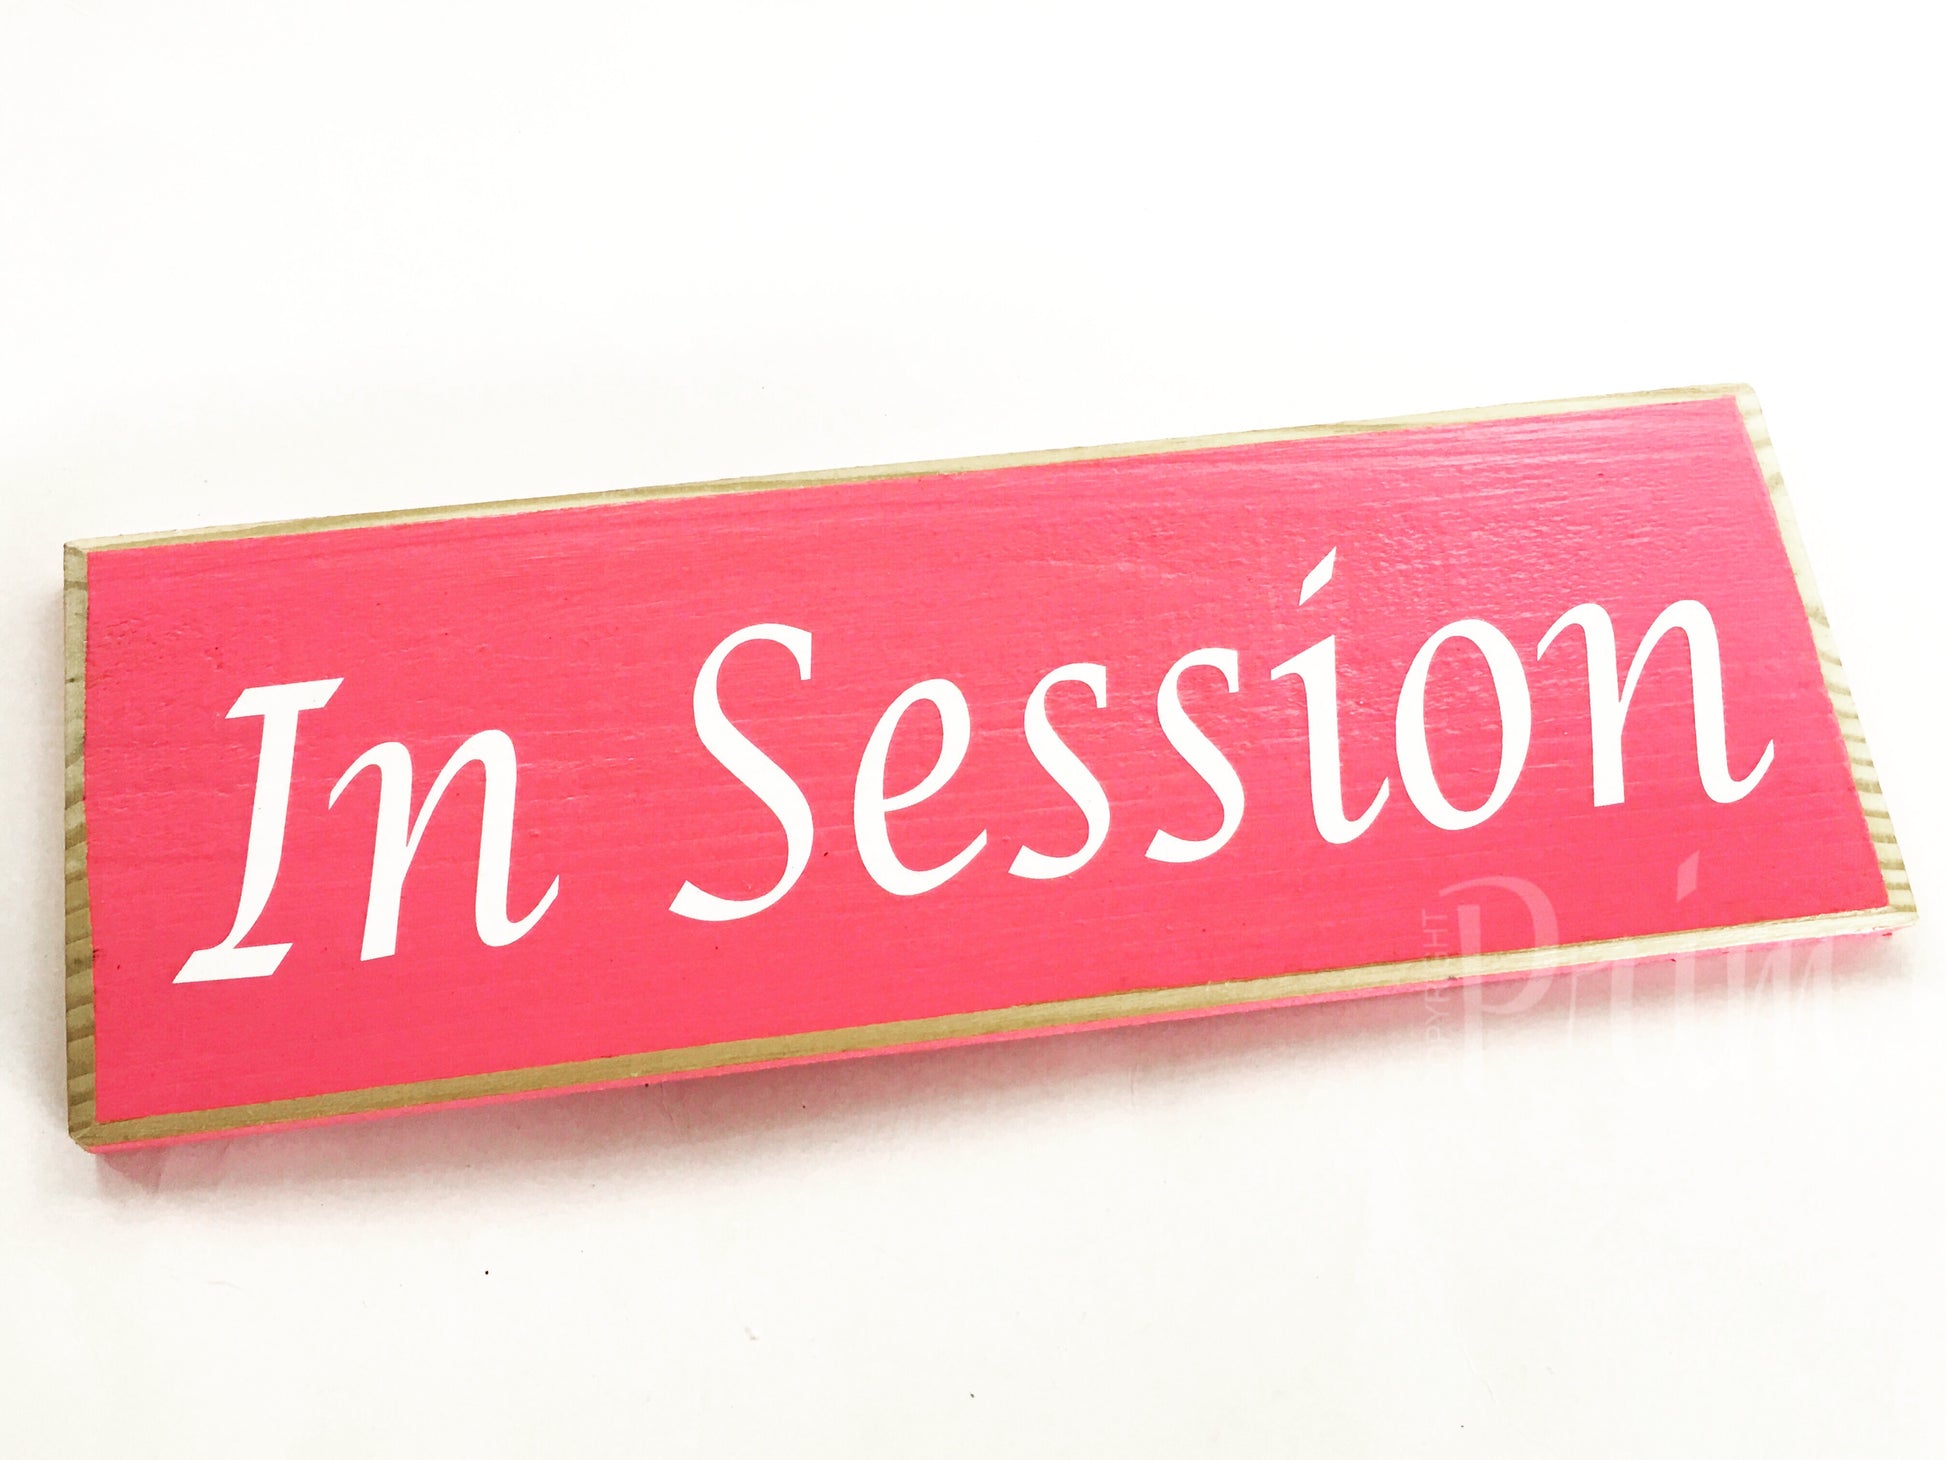 12x4 In Session Custom Wood Sign In Progress Meeting Spa Service Business Office Shhh Please Do Not Disturb Door Plaque 